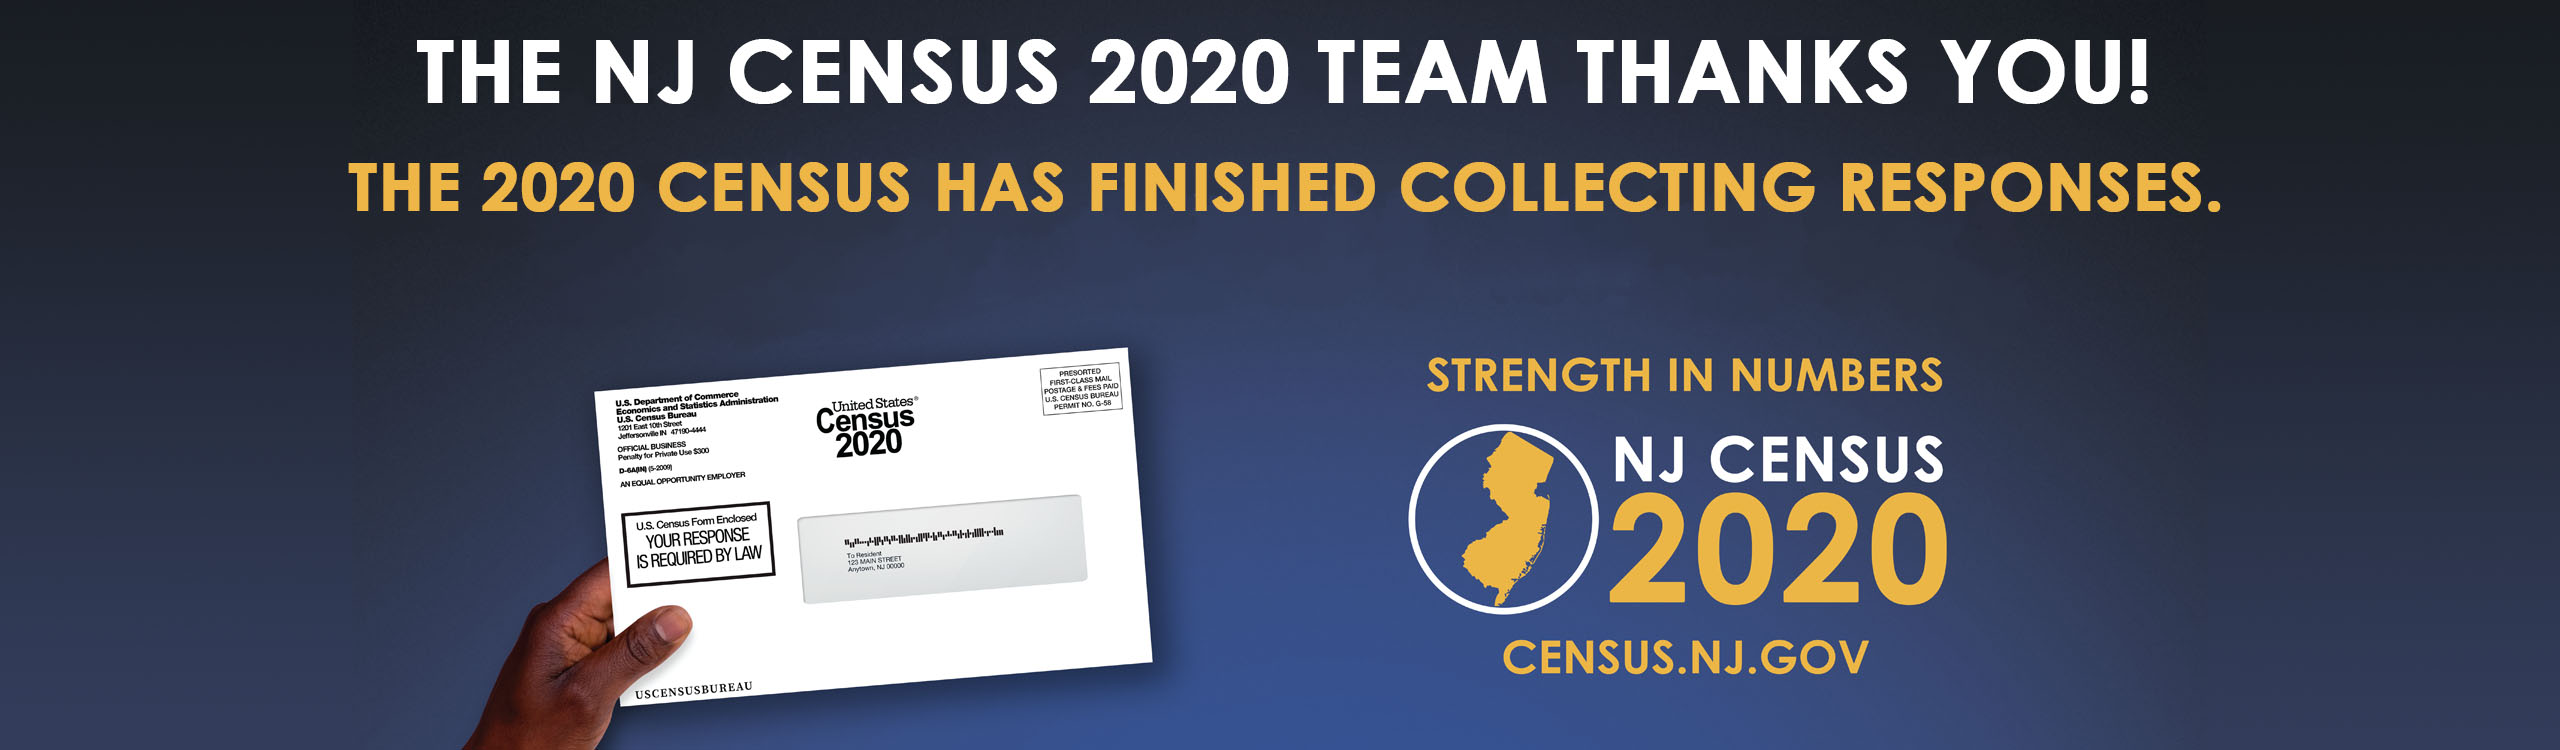 The NJ Census 2020 Team Thanks You!